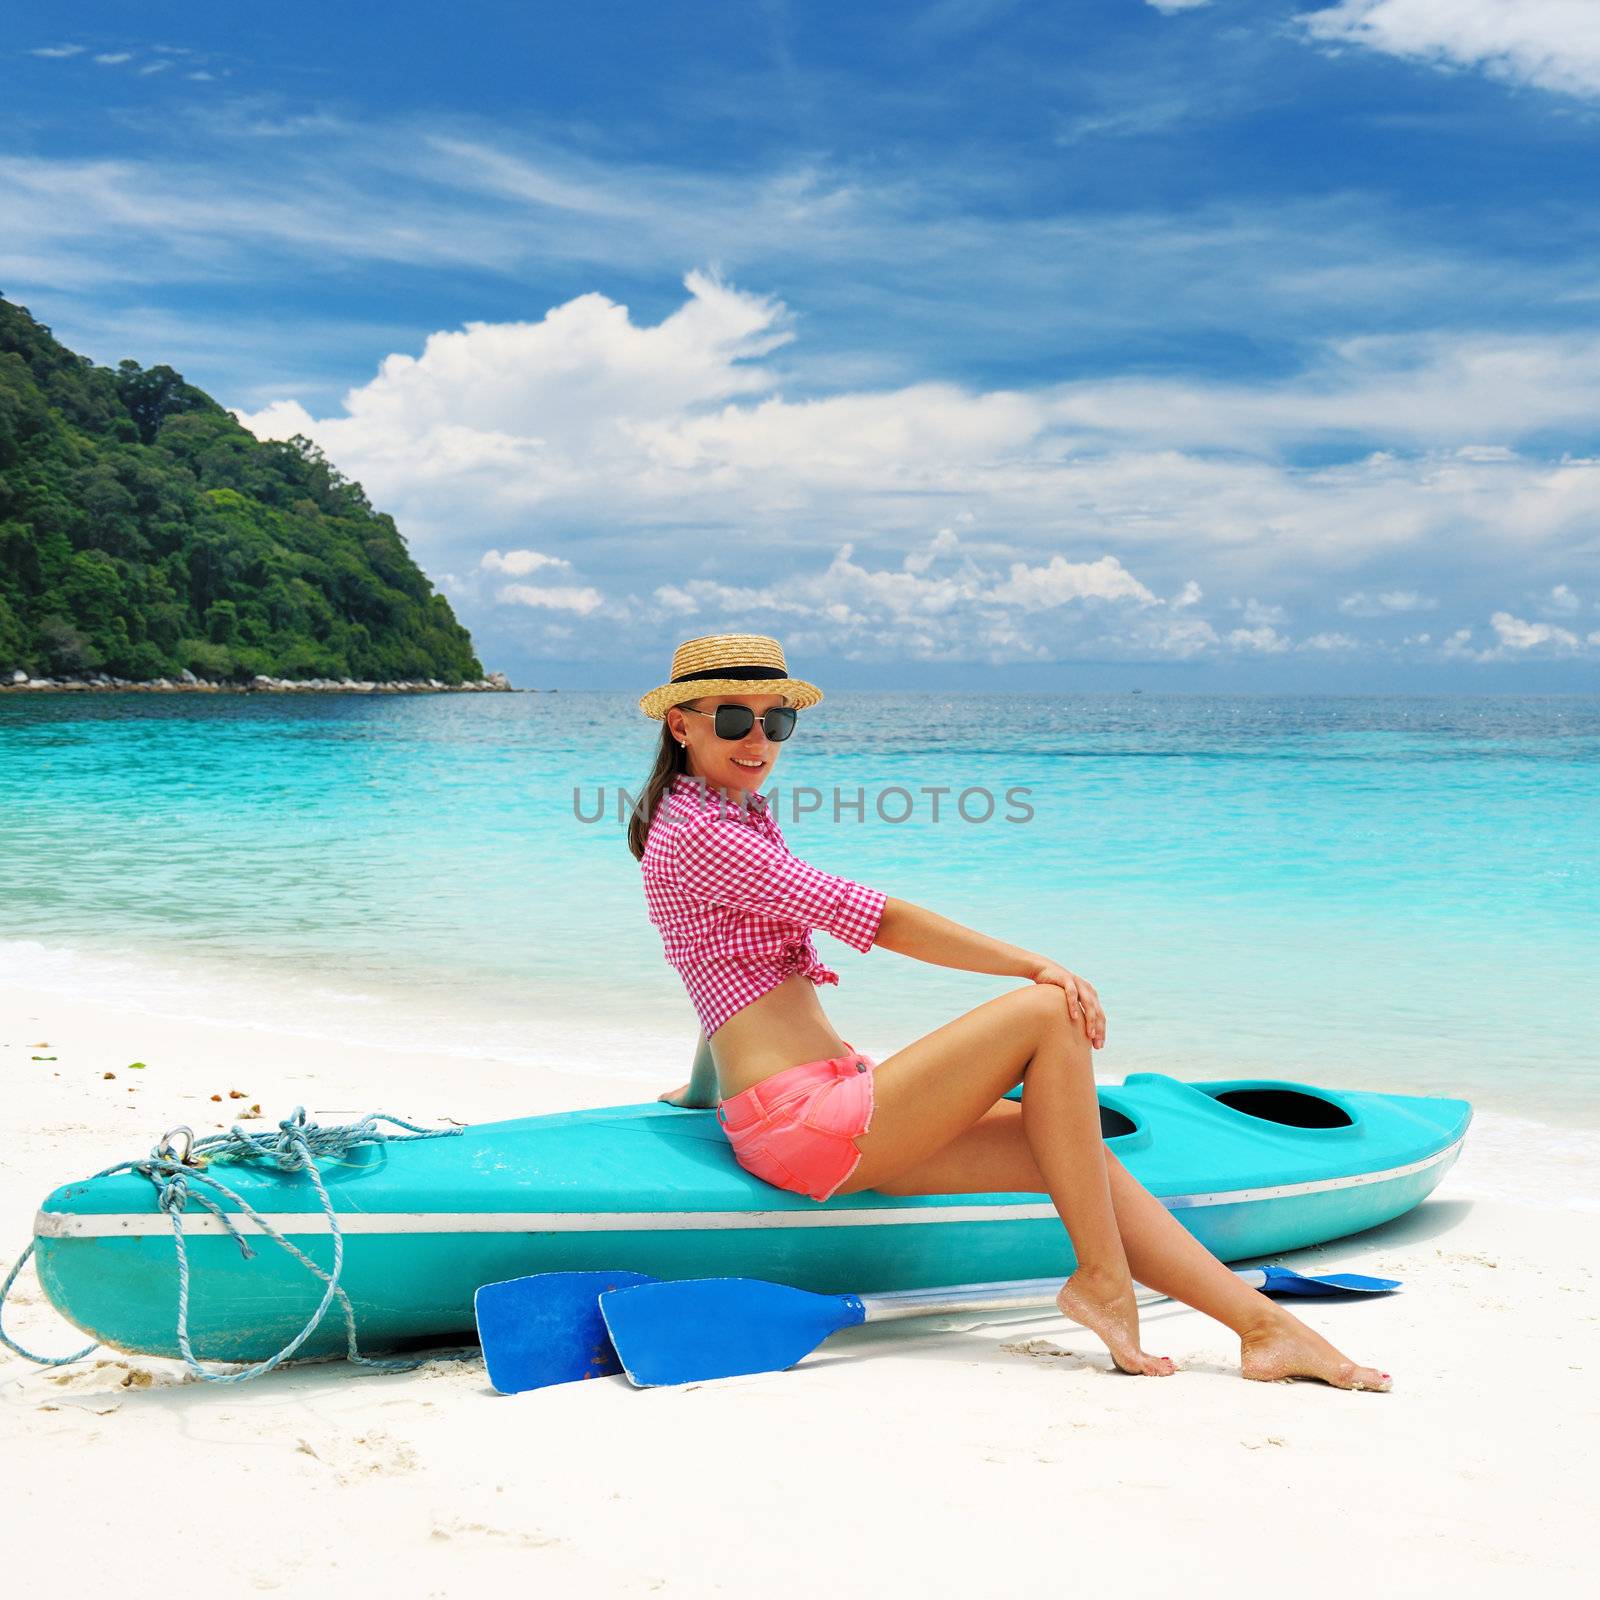 Woman in sunglasses at beach wearing hat